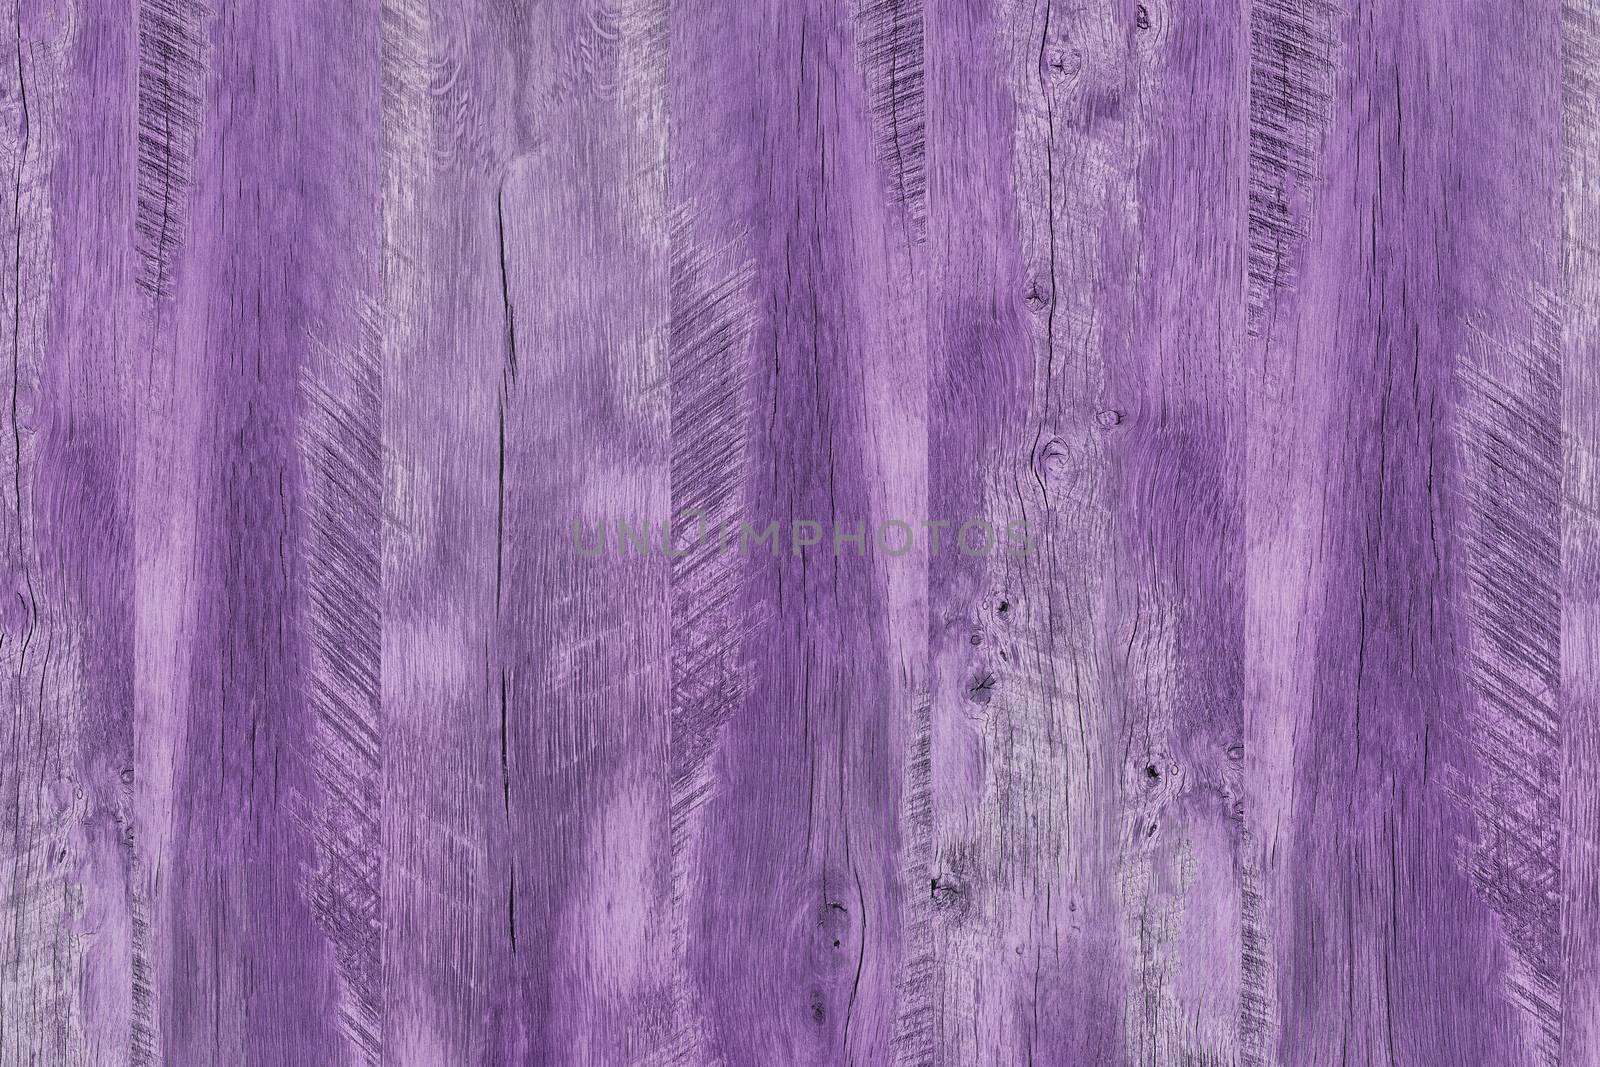 Wood texture with natural patterns, purple wooden texture. by ivo_13